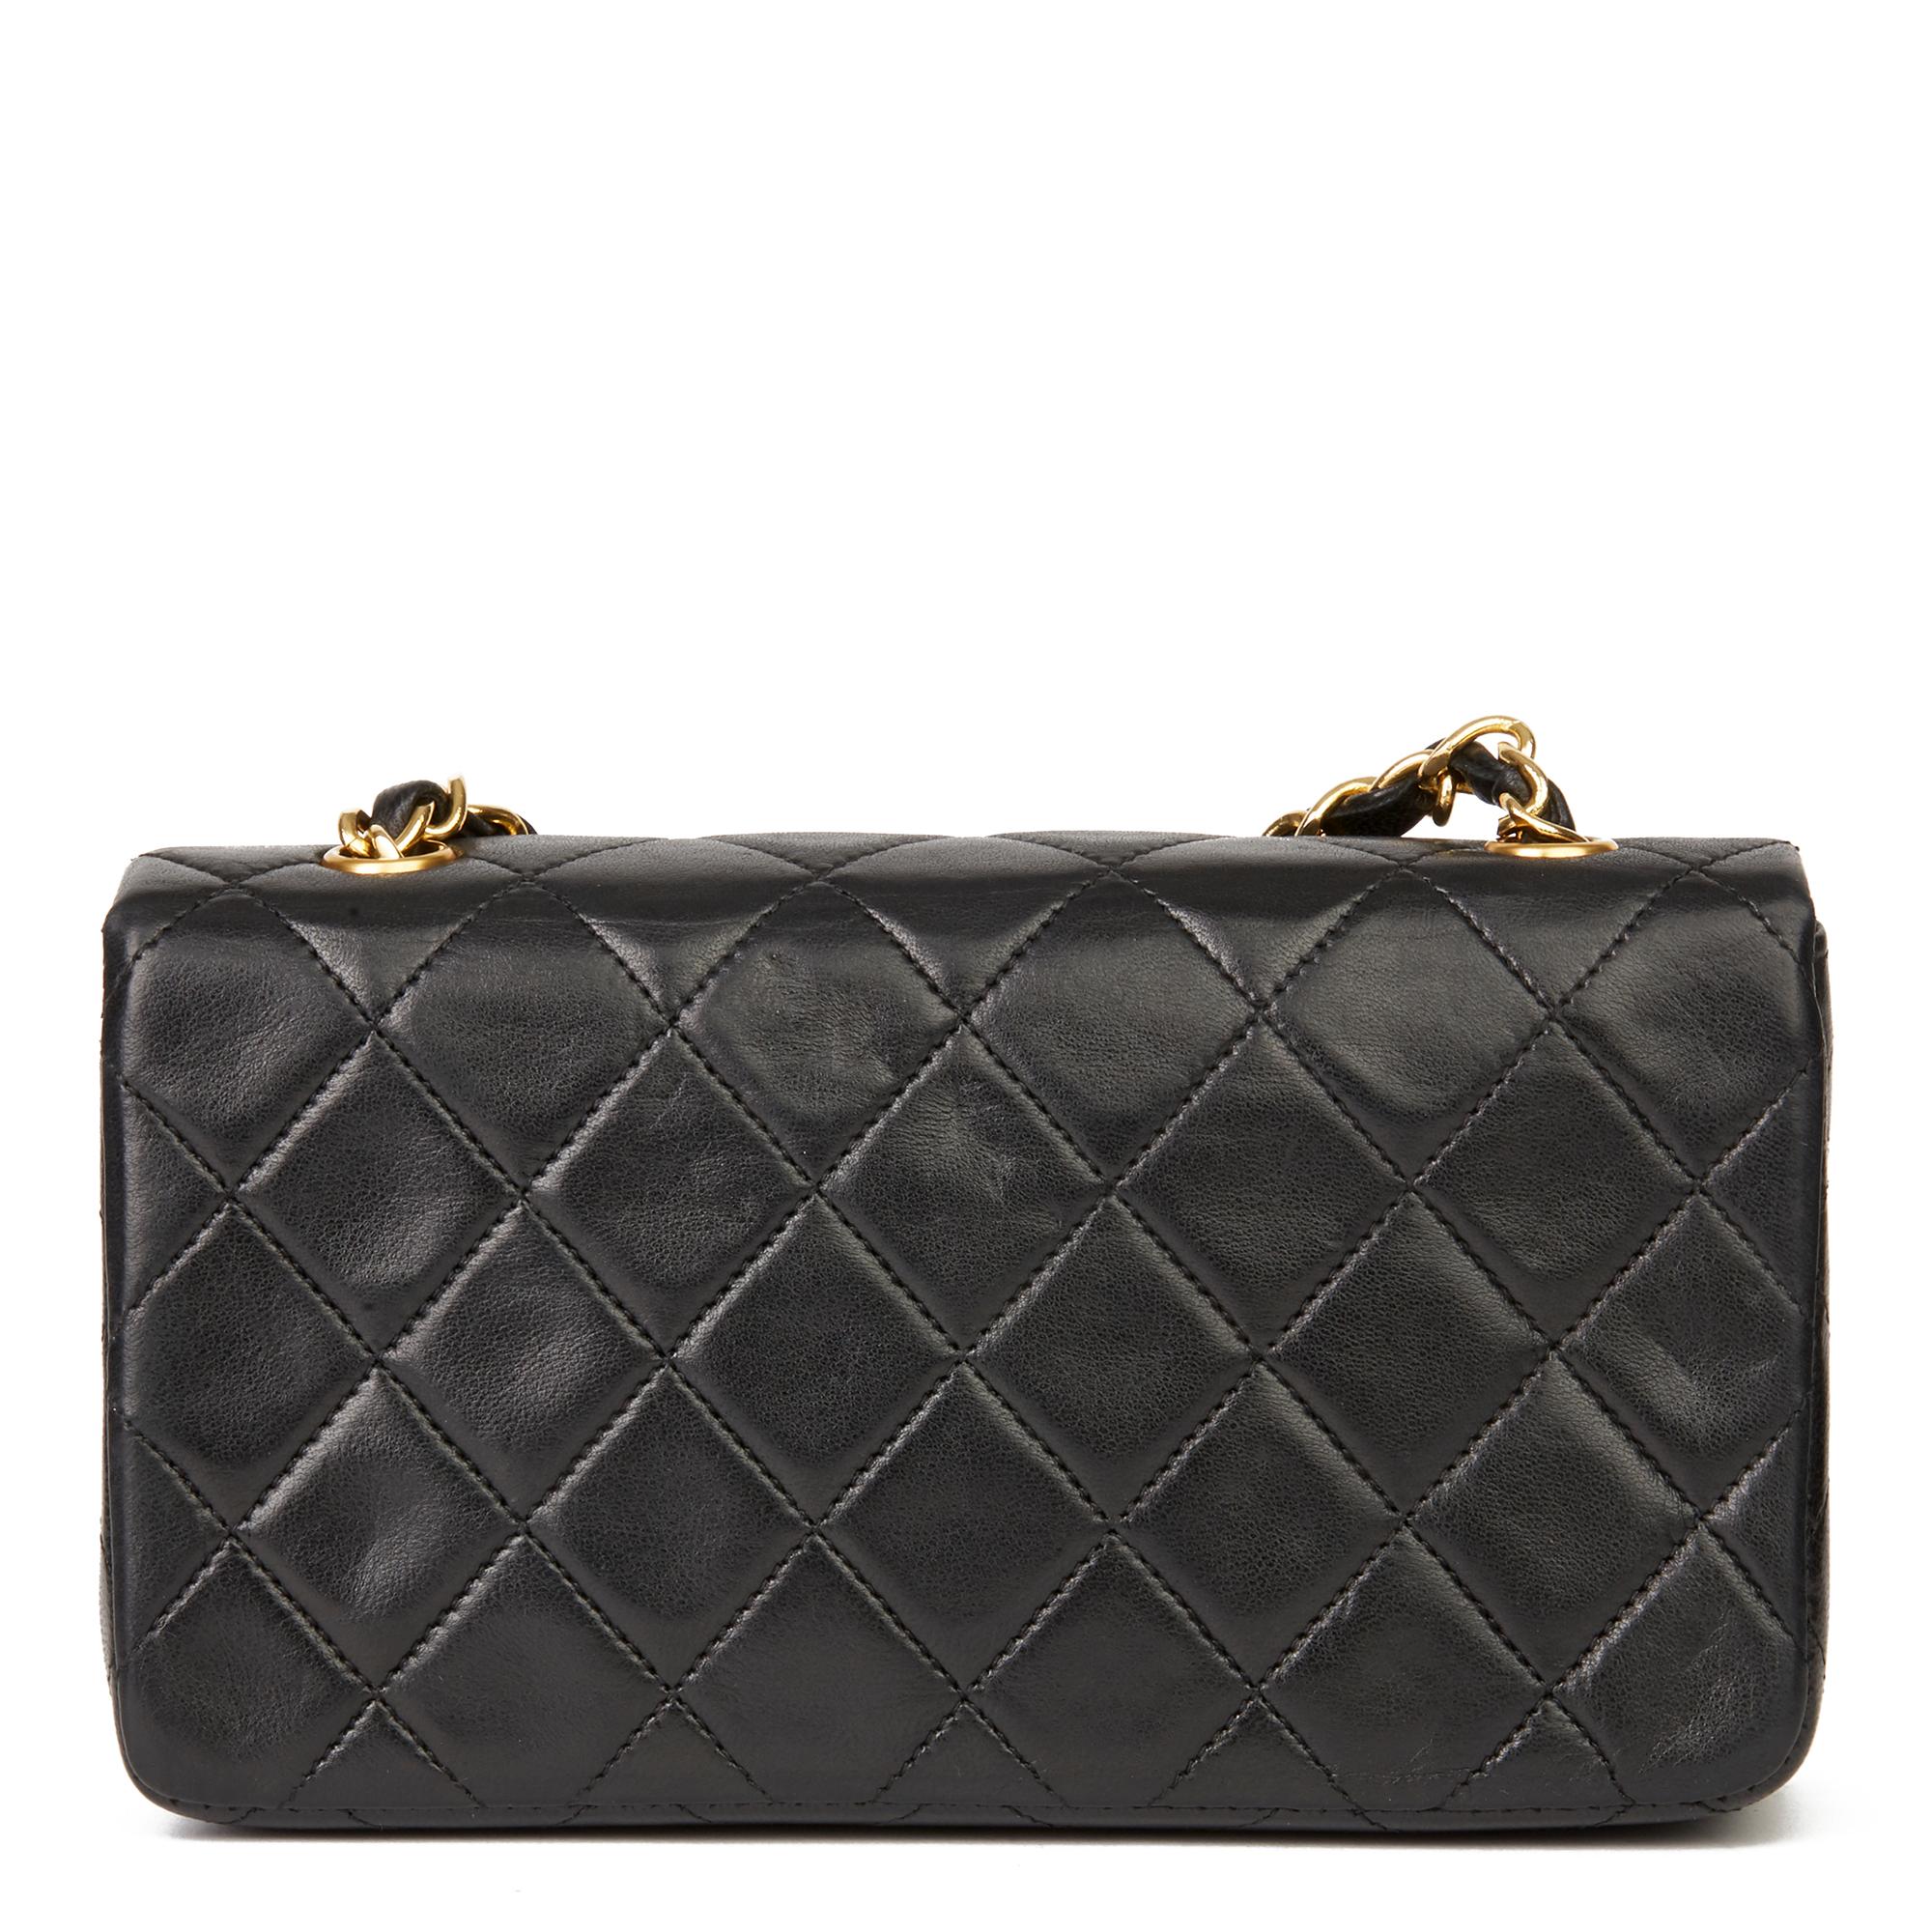 Women's 1991 Chanel Black Quilted Lambskin Vintage Mini Flap Bag